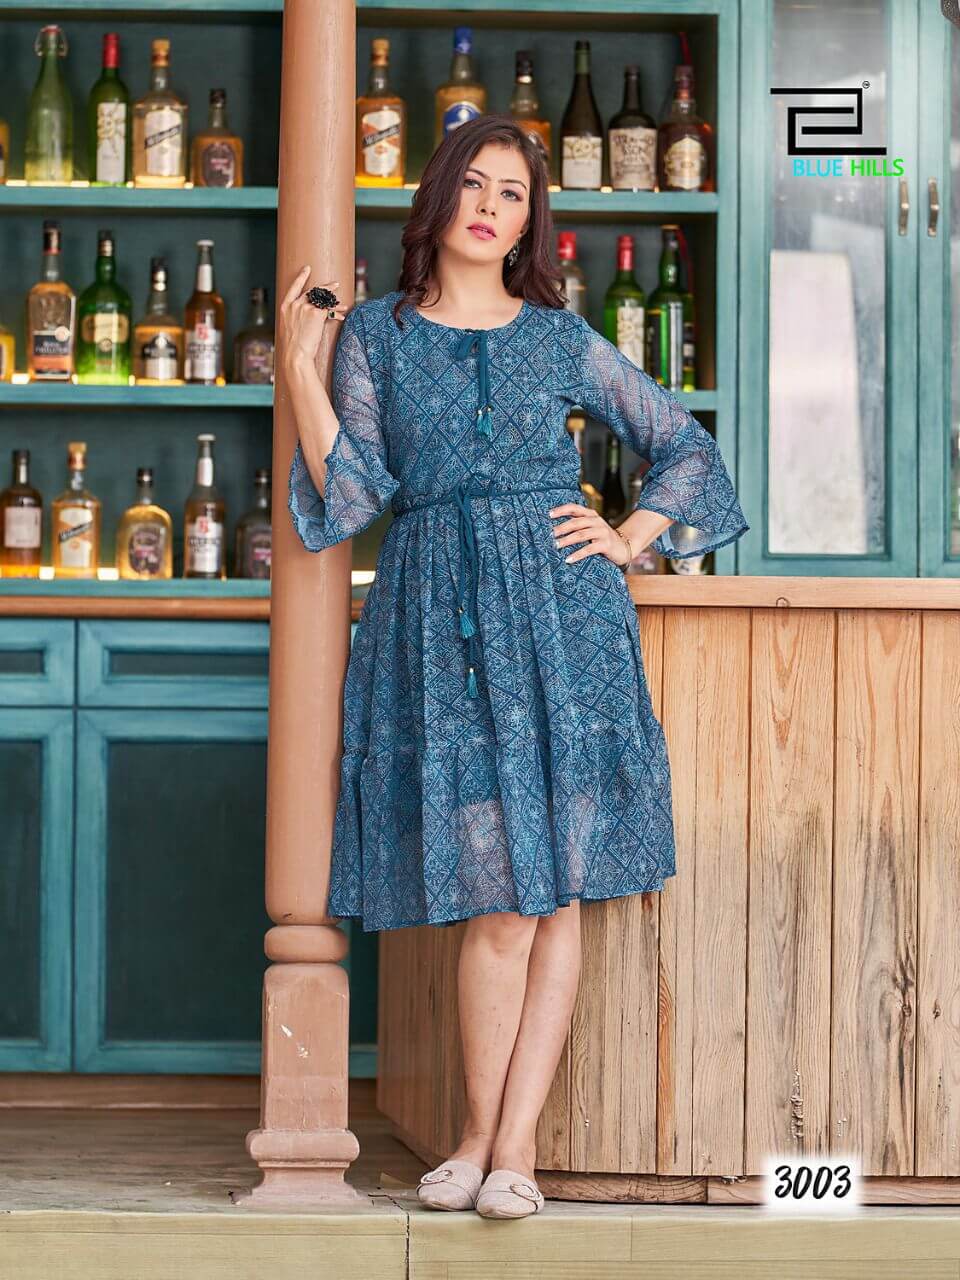 Blue Hills Charming vol 3 One Piece Dress Catalog collection 9